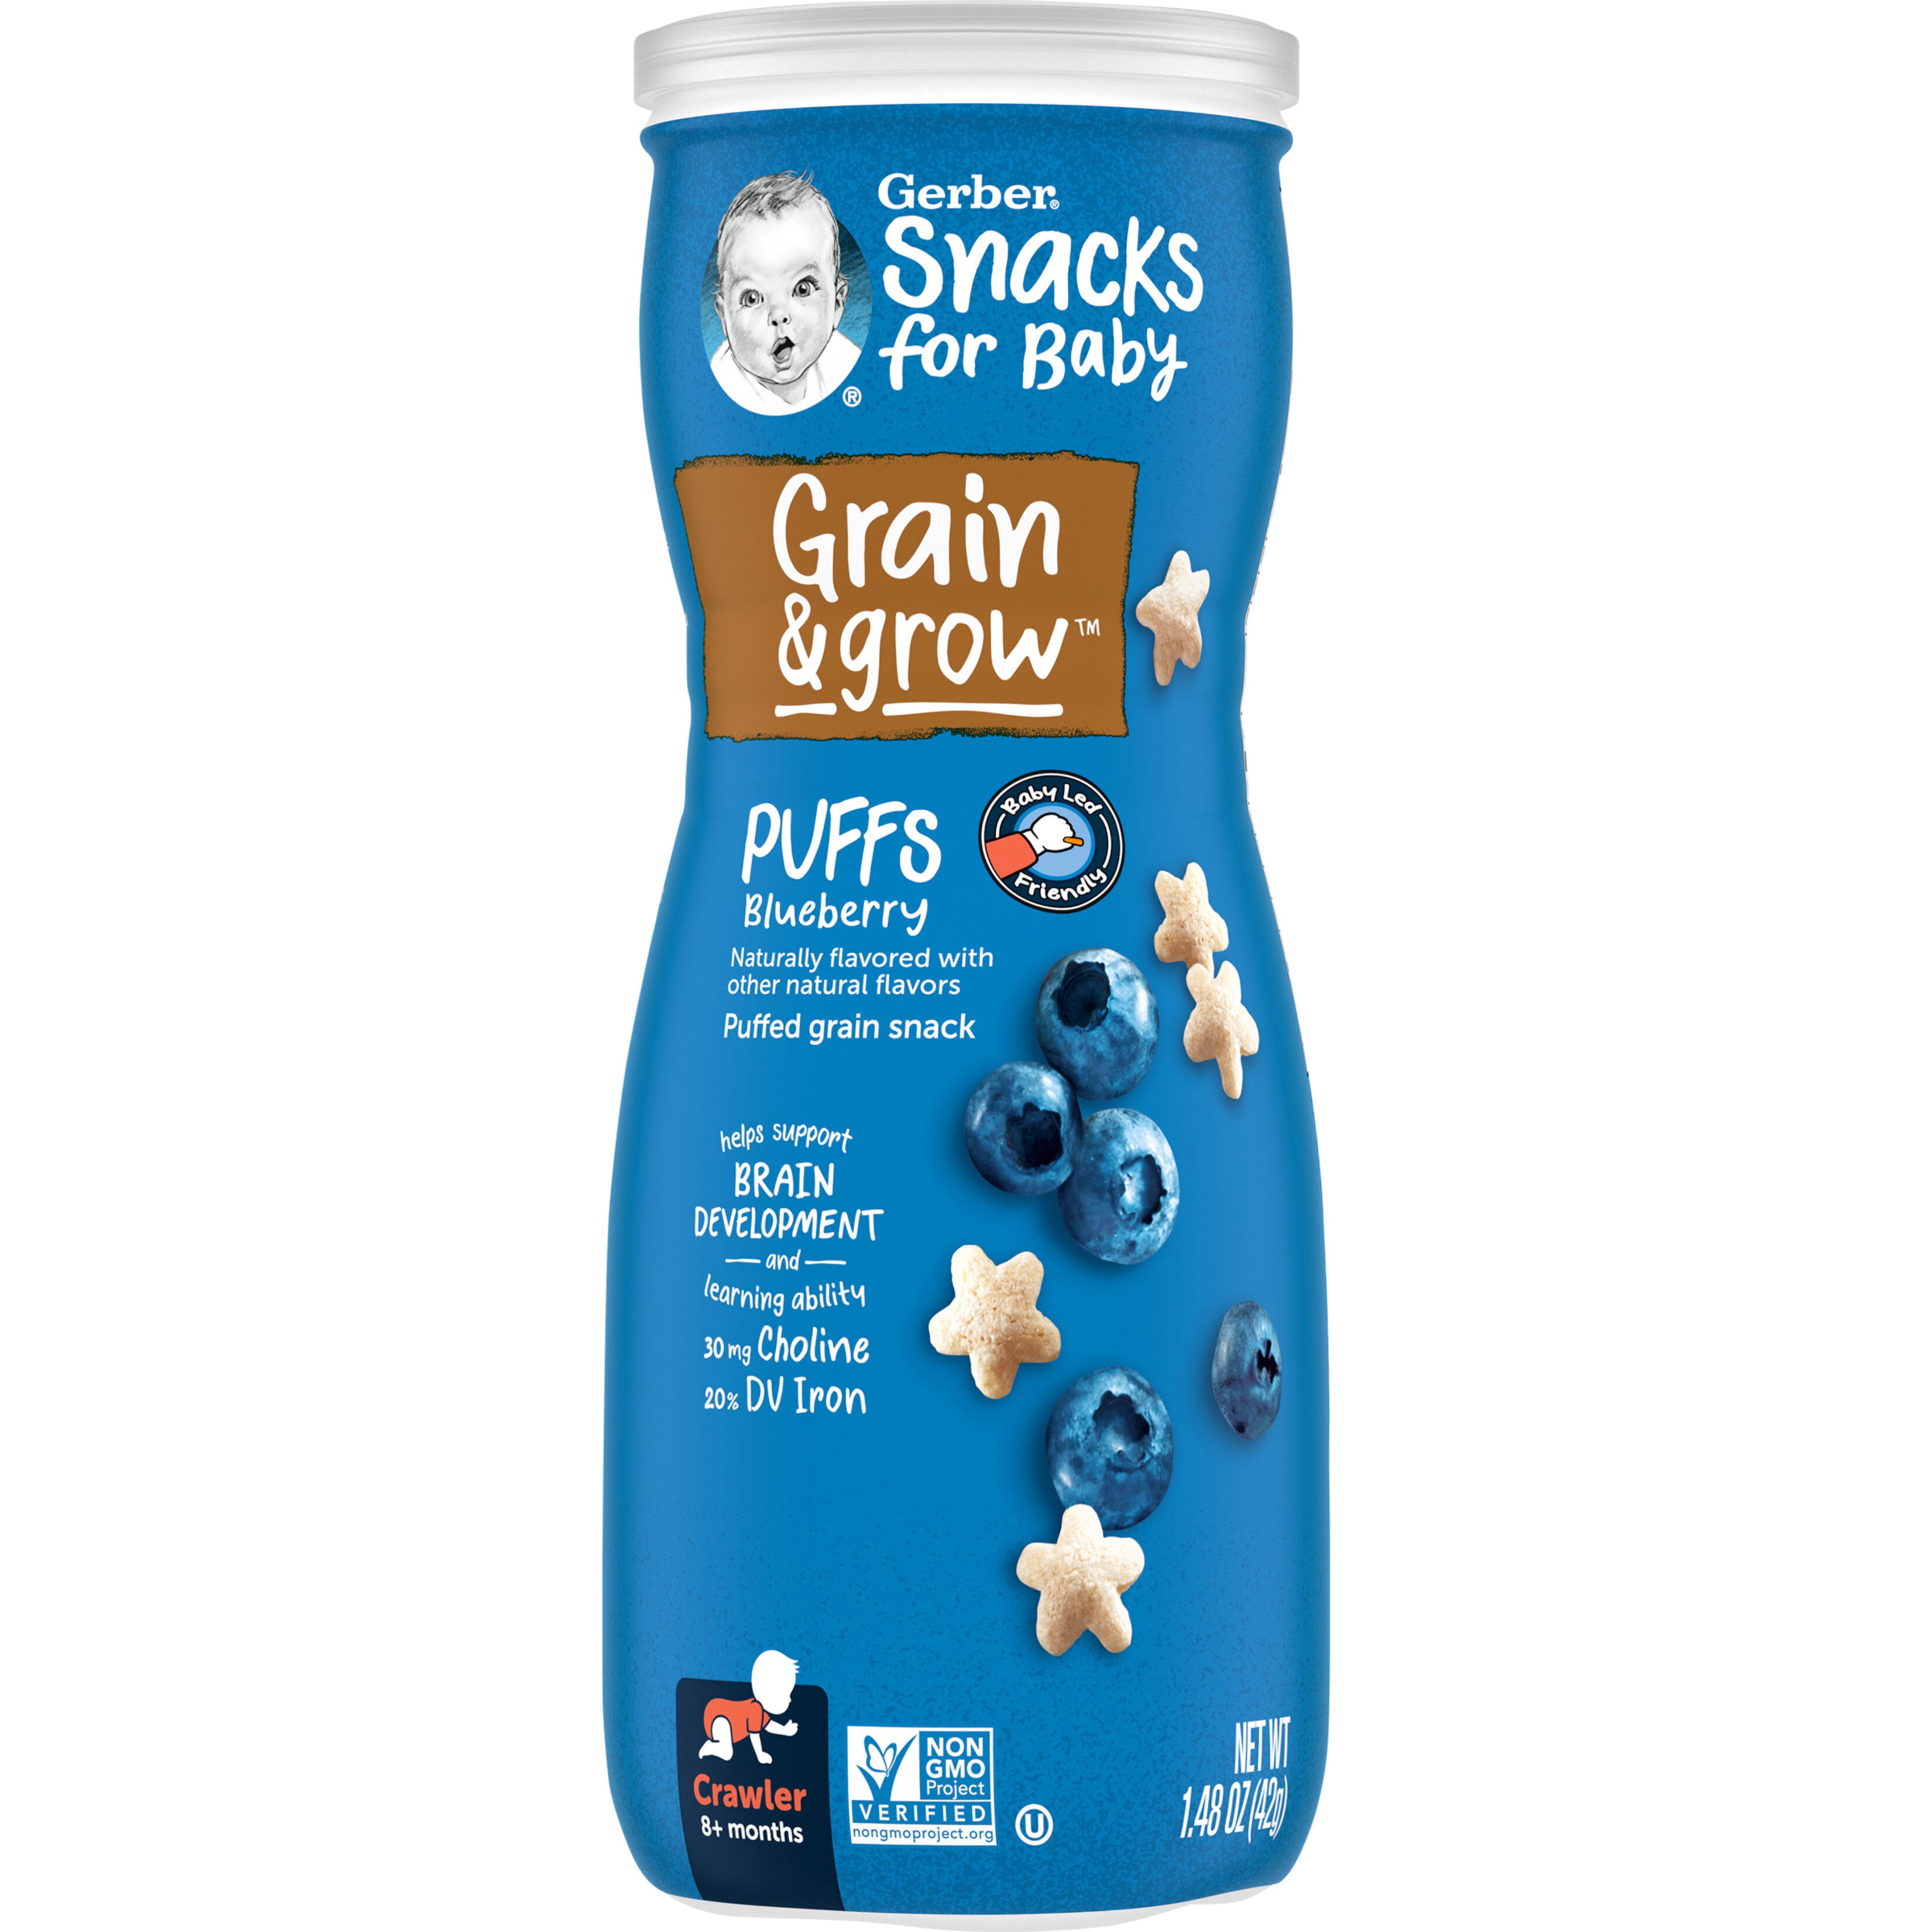 Gerber Snacks for Baby Grain & Grow Puffs, Blueberry, 1.48 oz Canister